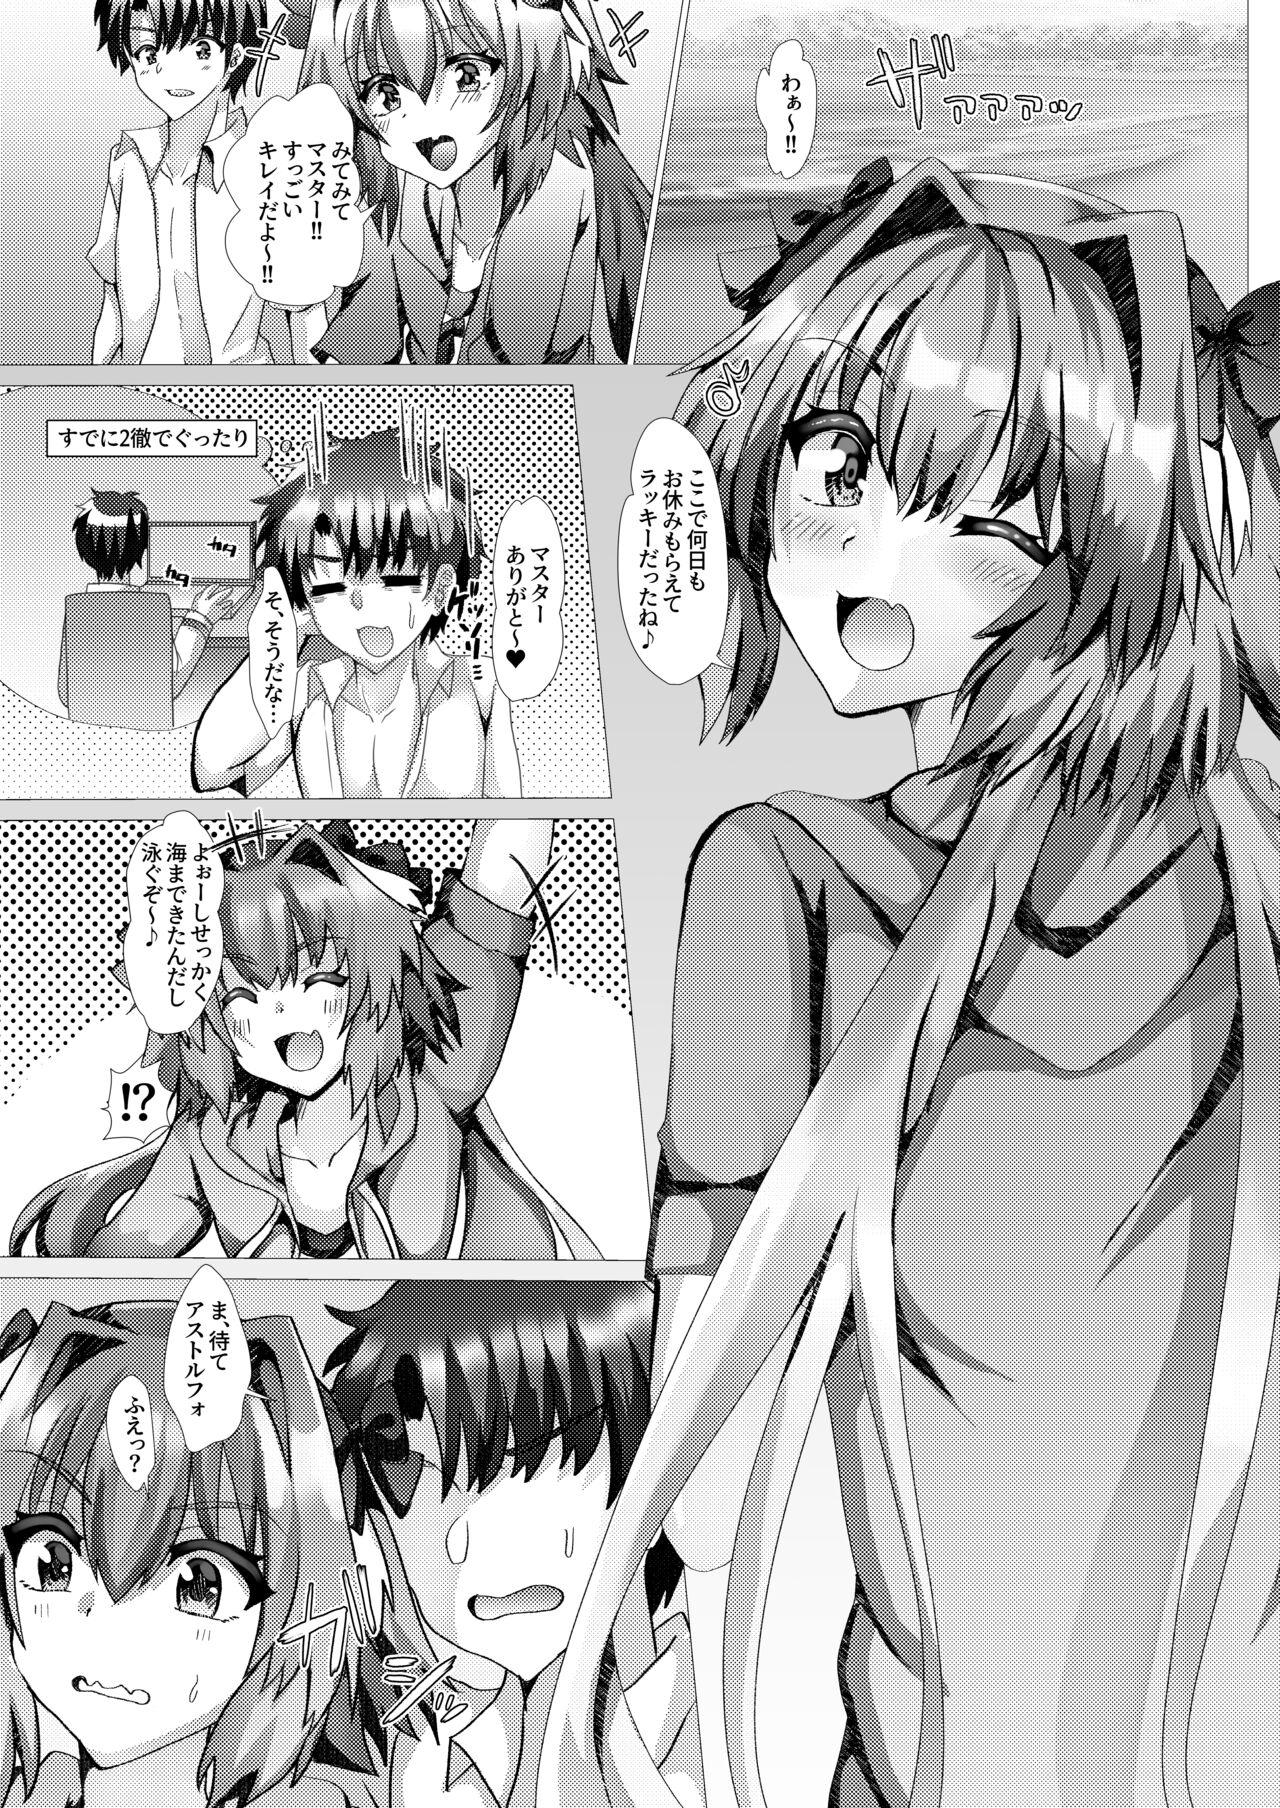 Pasivo Astolfo to Summer Vacation + Omake - Fate grand order Cumshot - Page 2